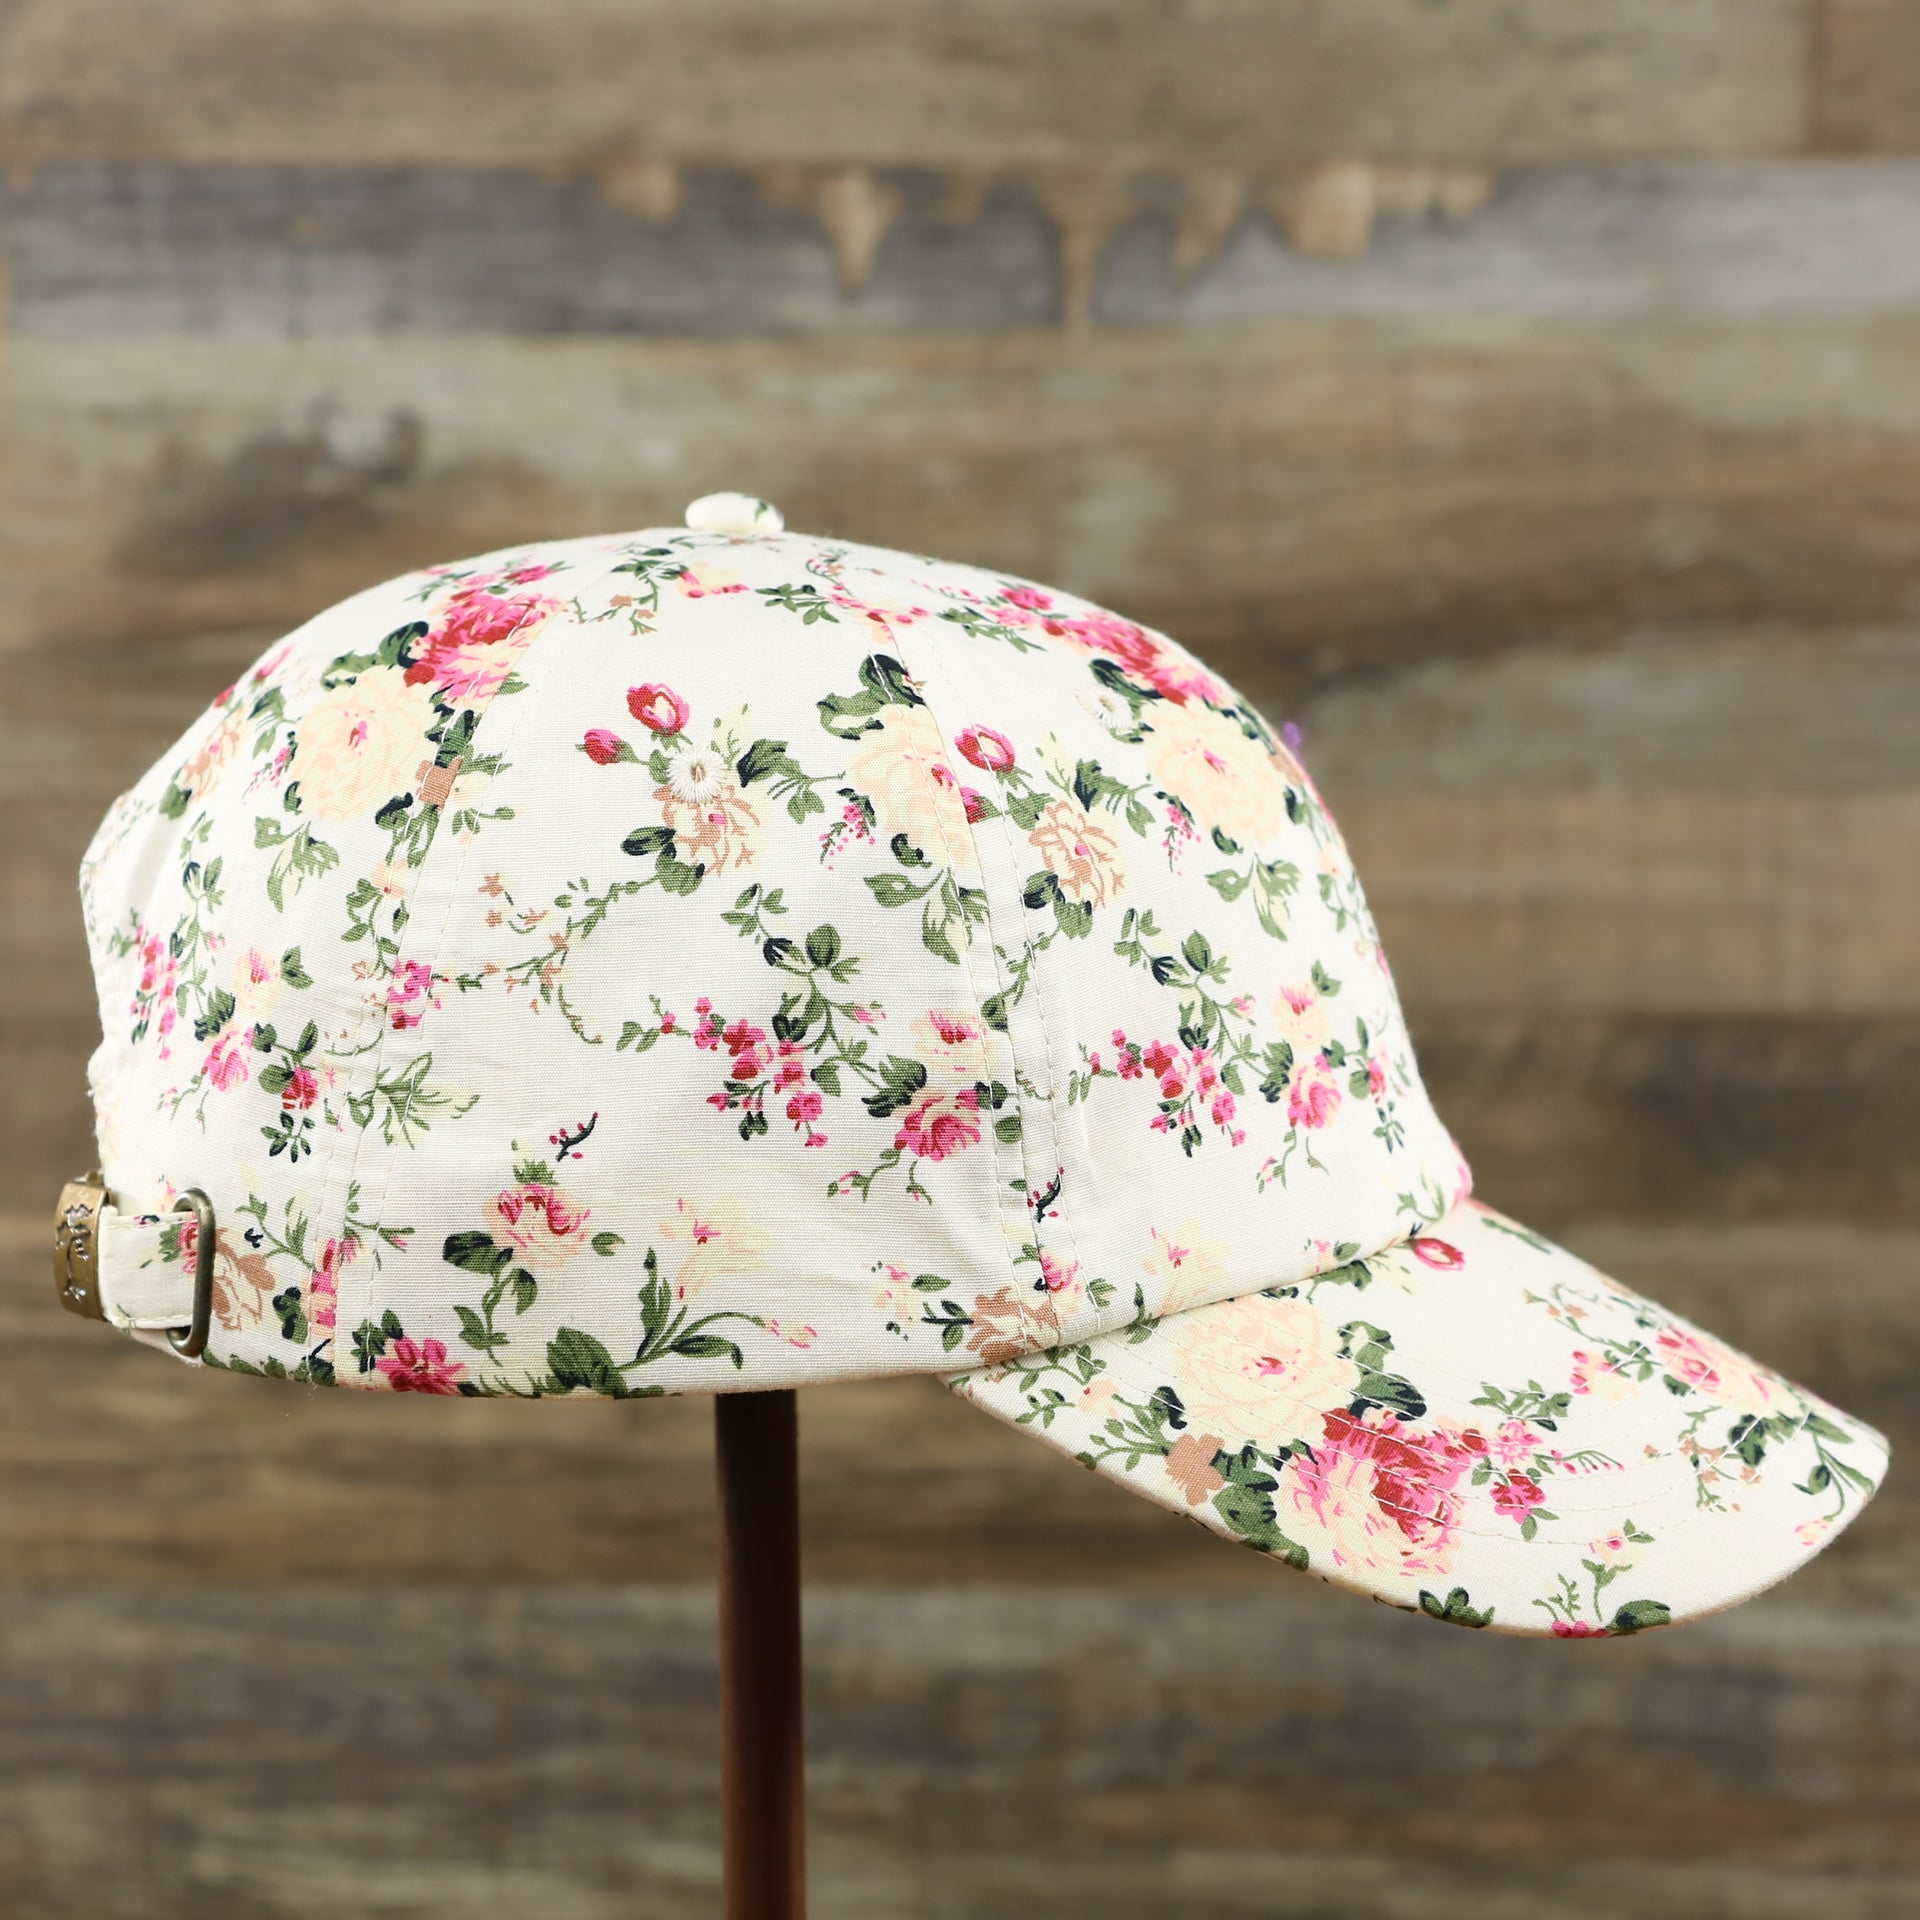 The wearer's right on the Floral Print Blank Adjustable Baseball Hat | Cream Dad Hat